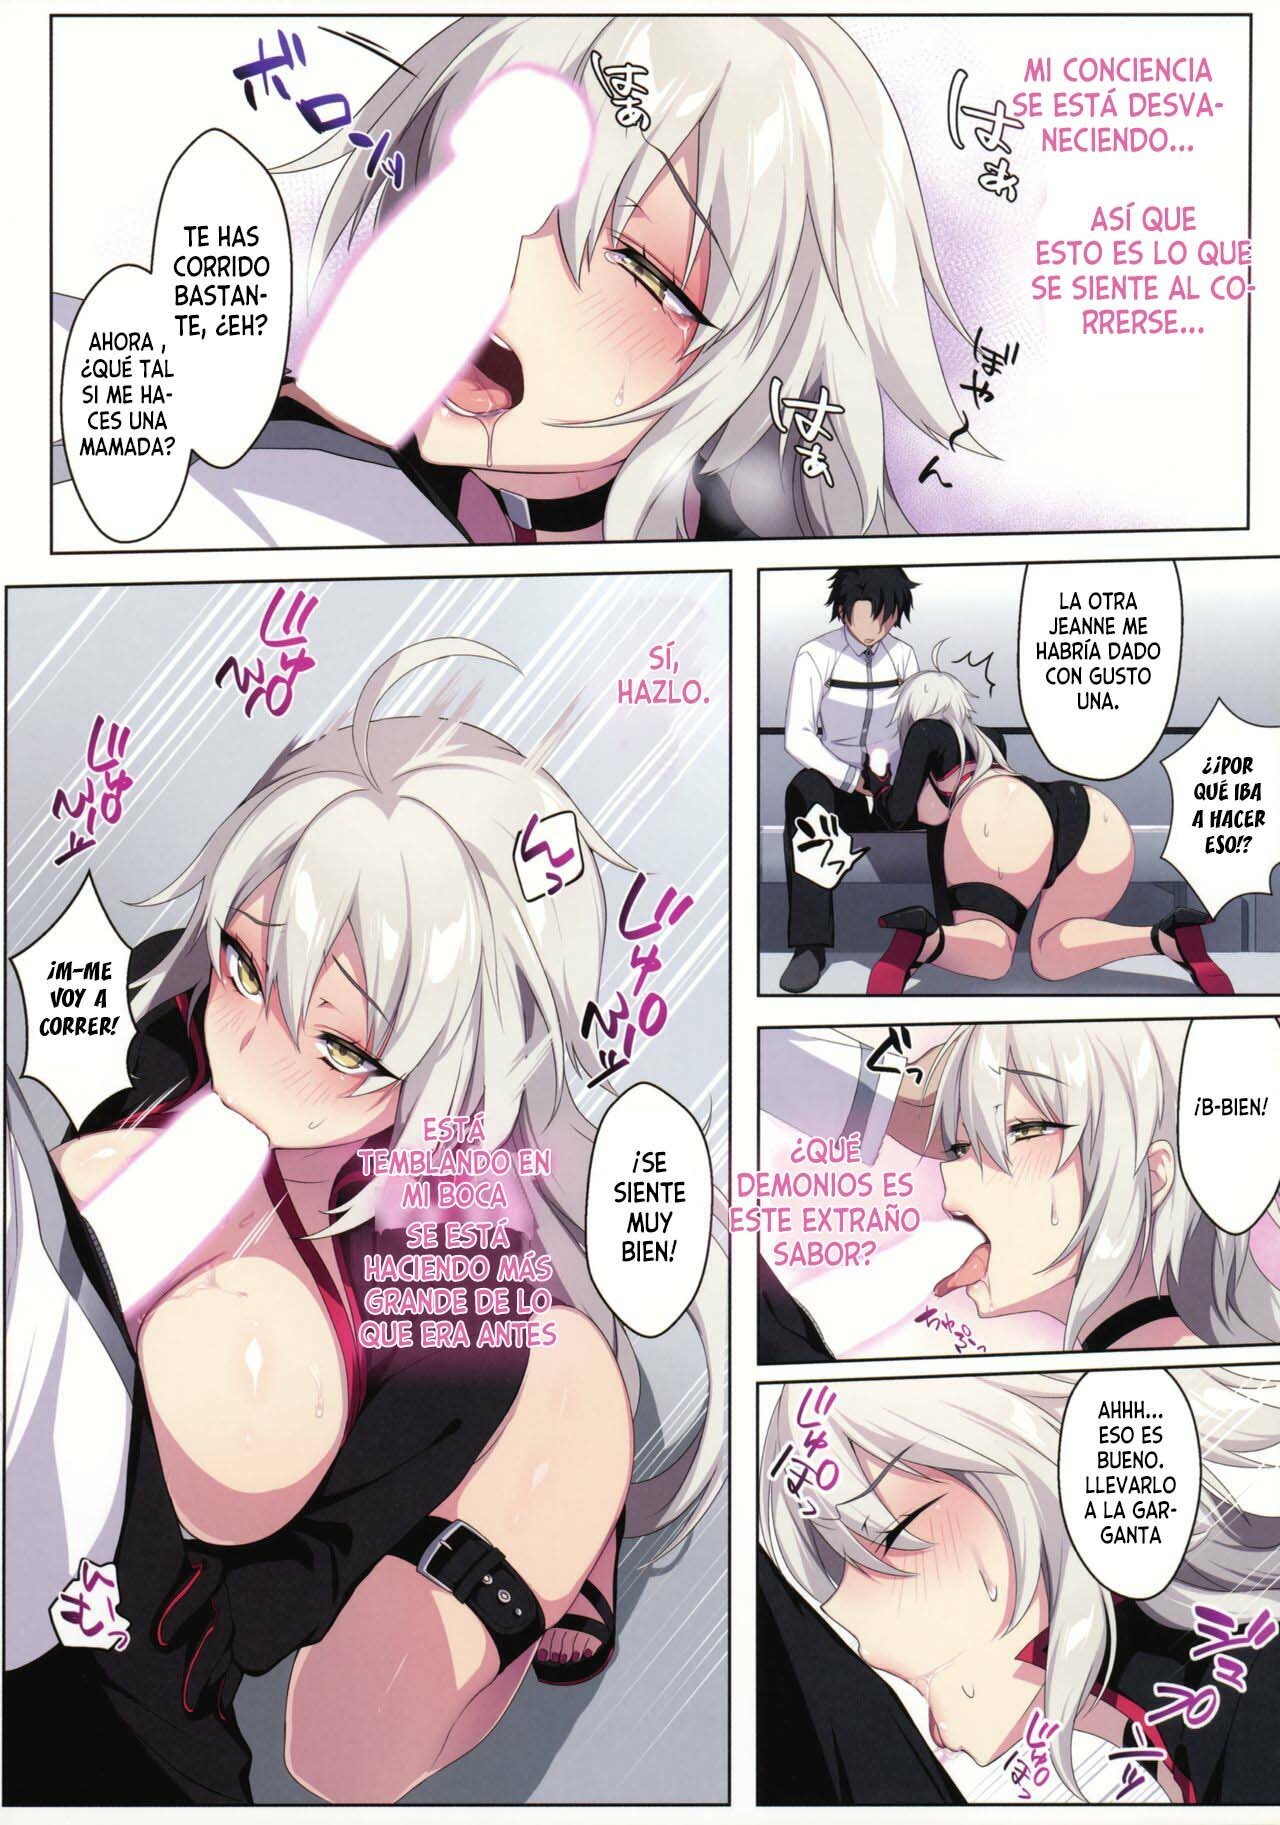 Jeanne Alter Wants to Mana Transfer! - 7